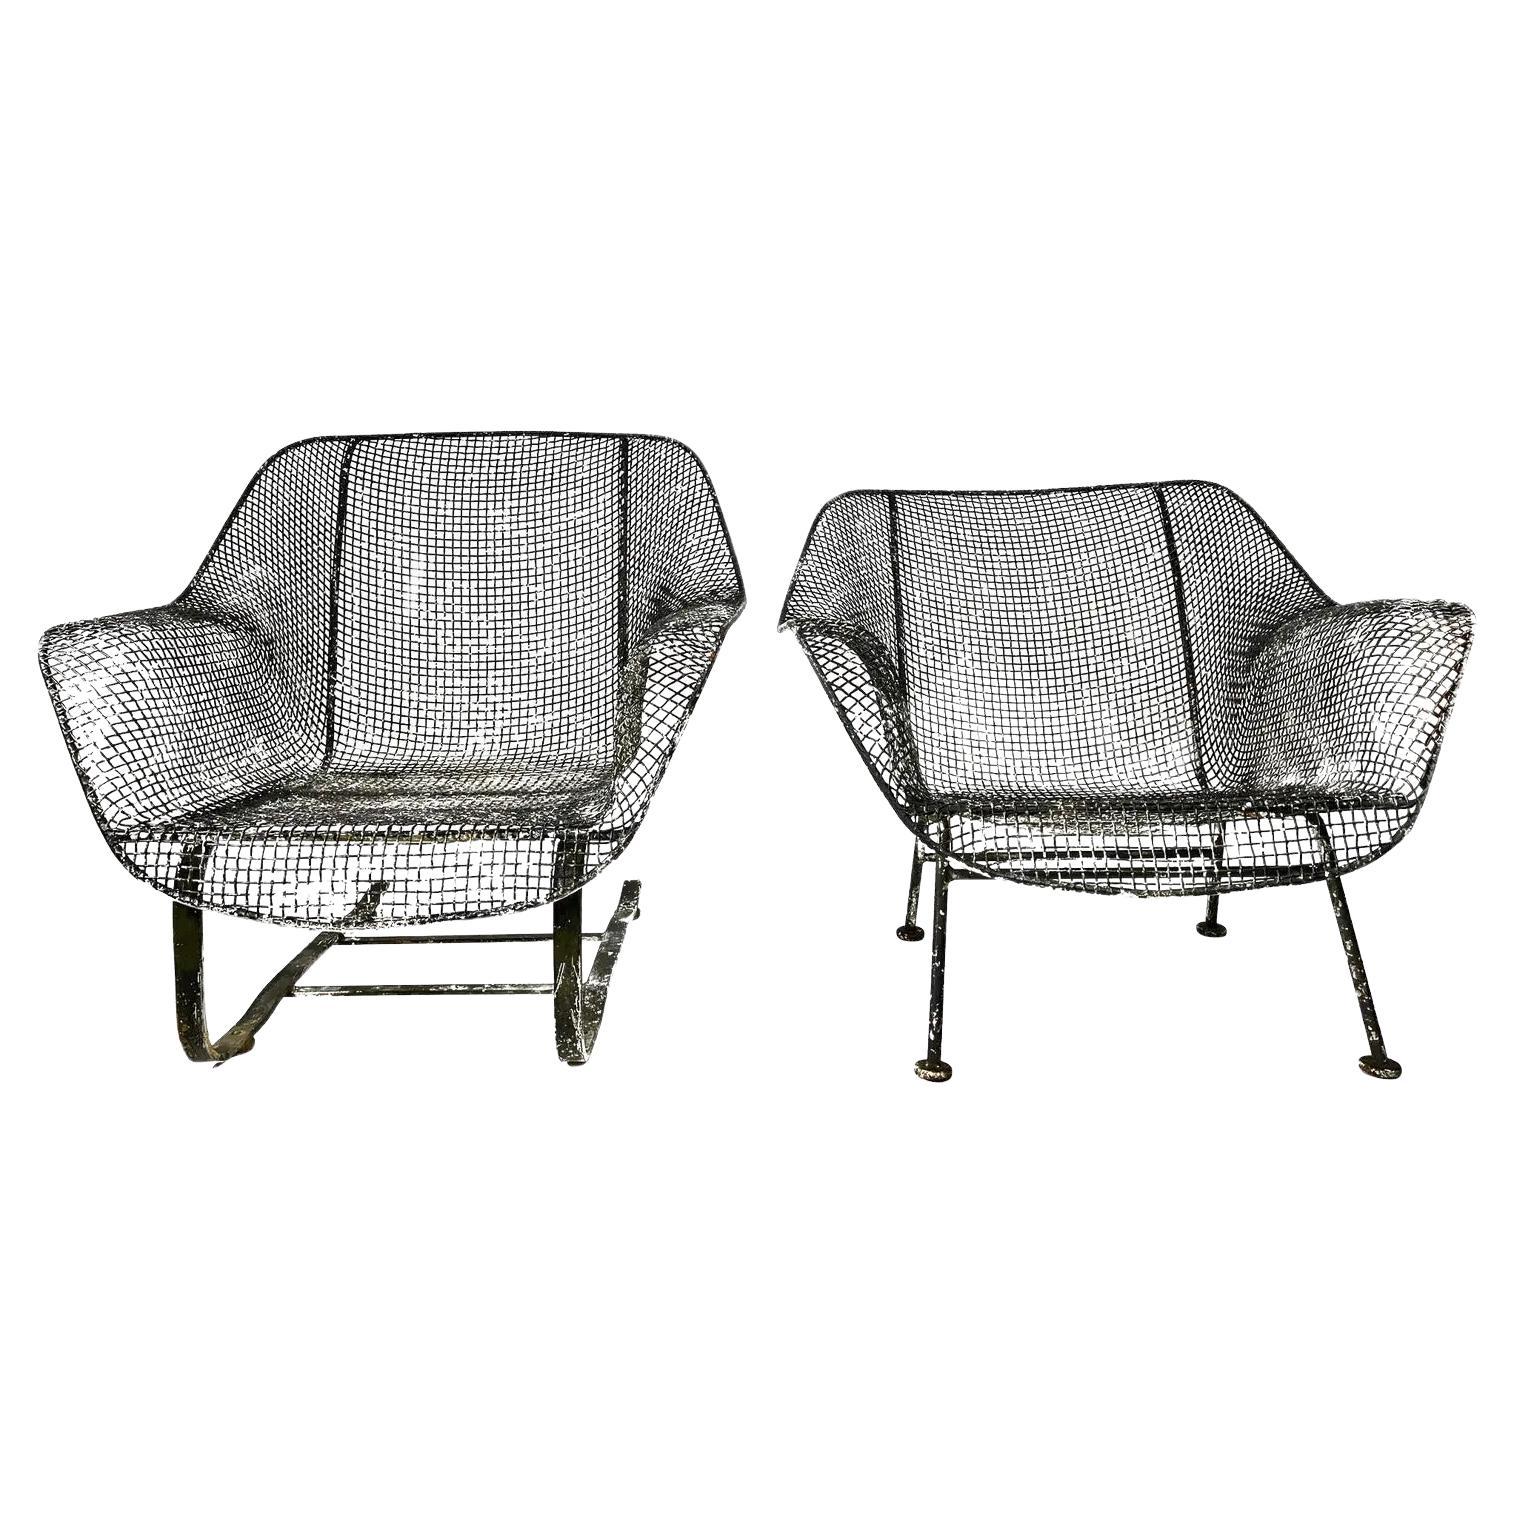 Russell Woodard Sculptura Wrought Iron Lounge Chairs, a Pair